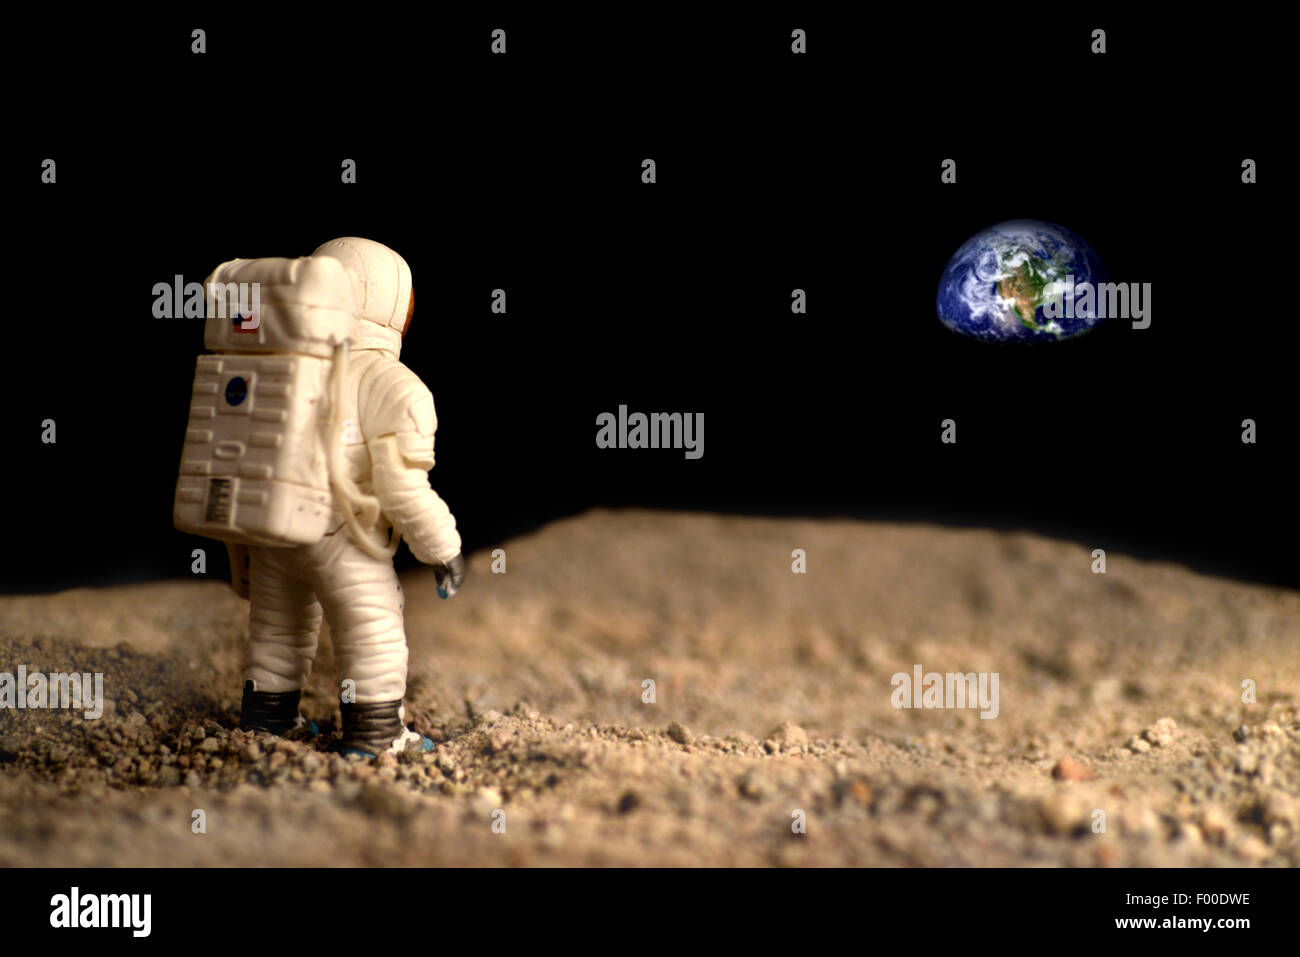 American Astronaut on the moon looking at earth on the background, elements of this image furnished by NASA. Stock Photo